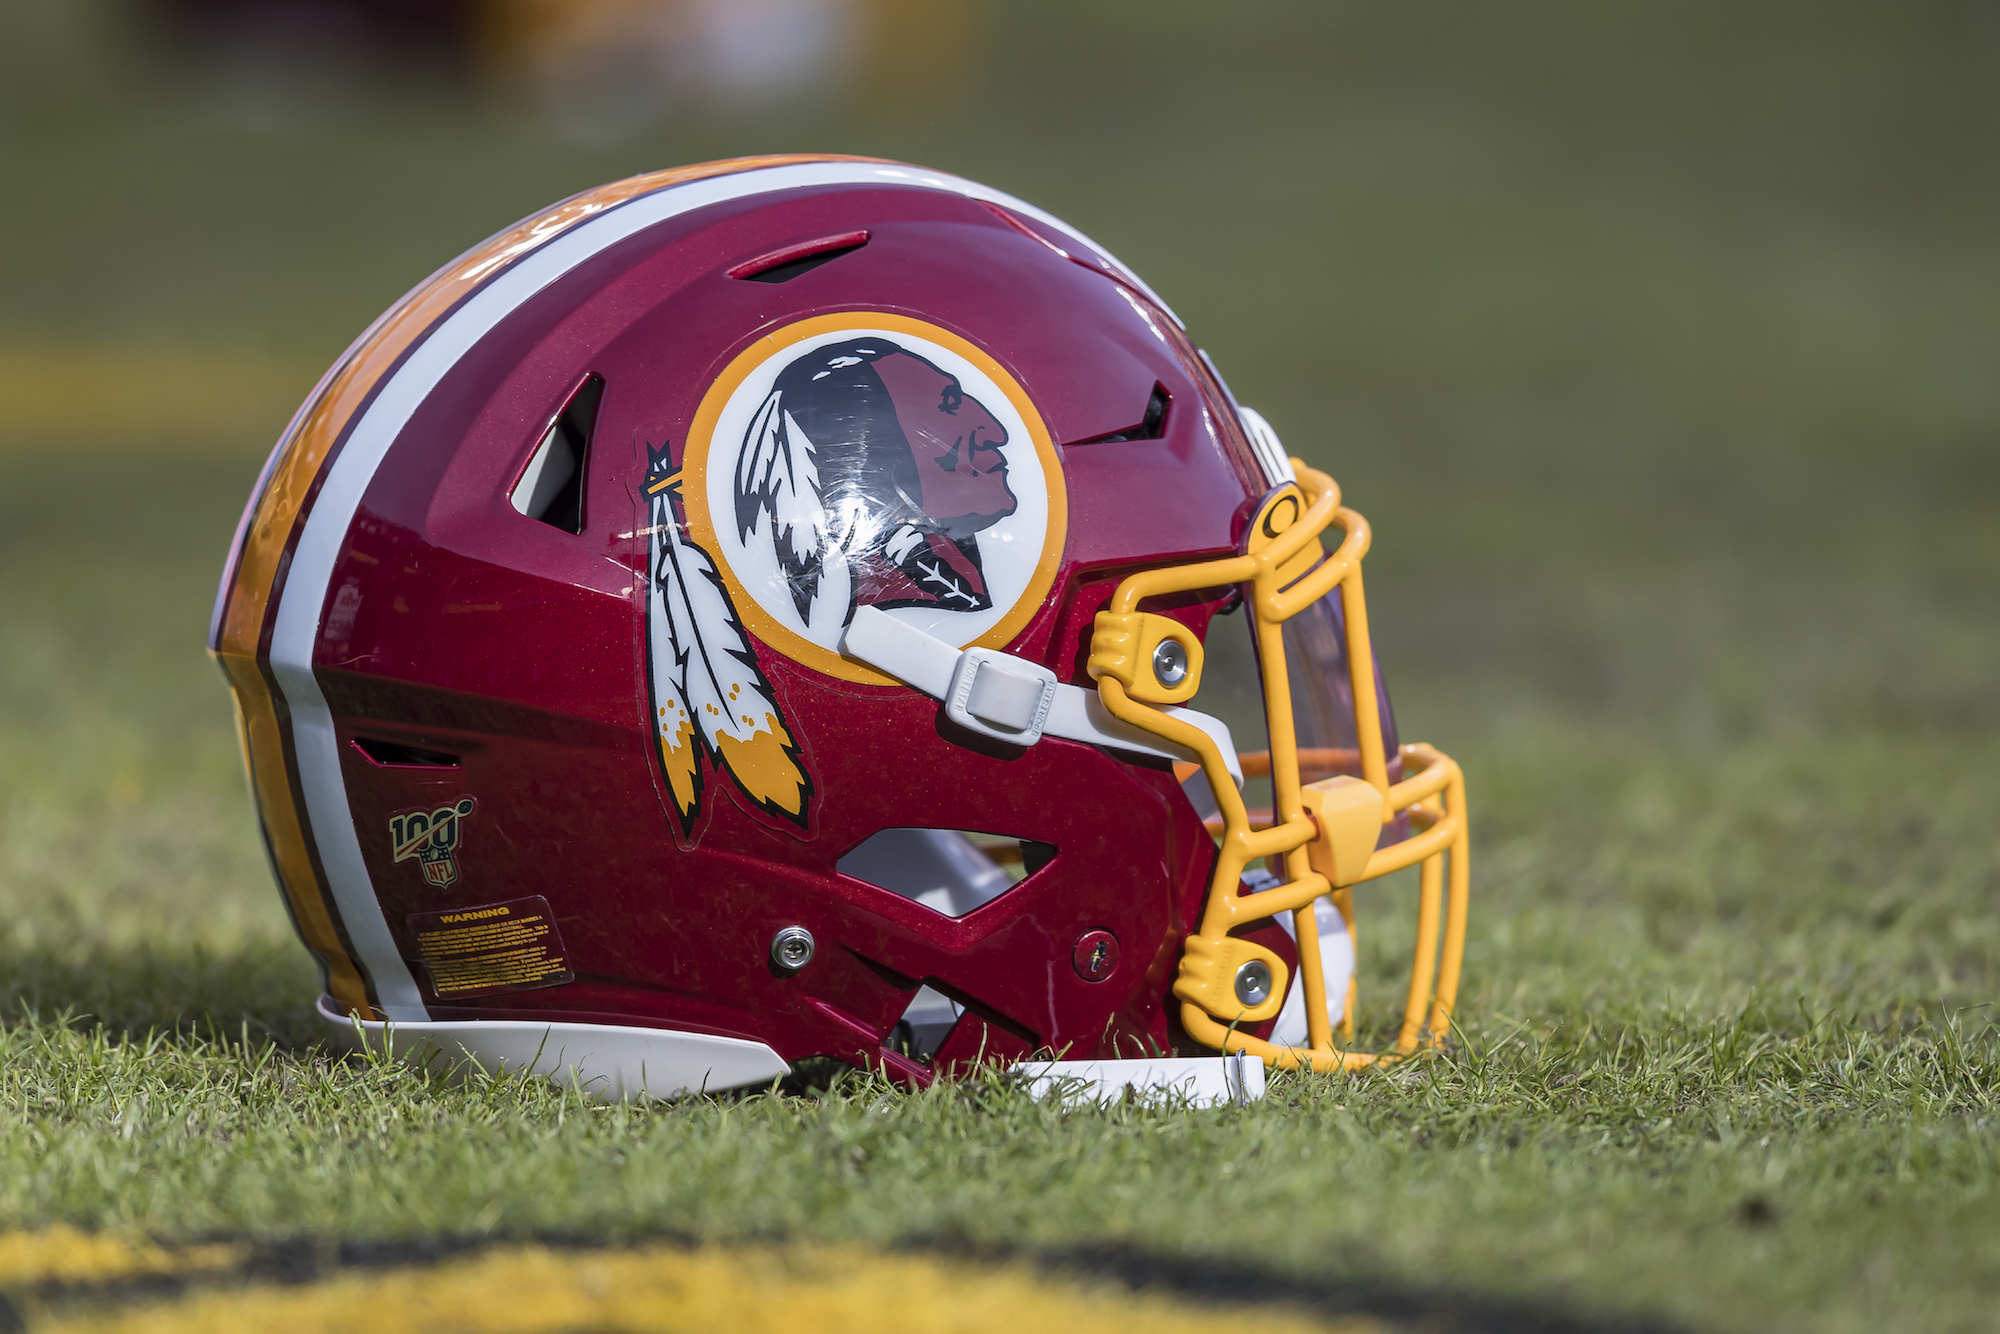 After years of pressure, the Washington Redskins are finally changing their name.